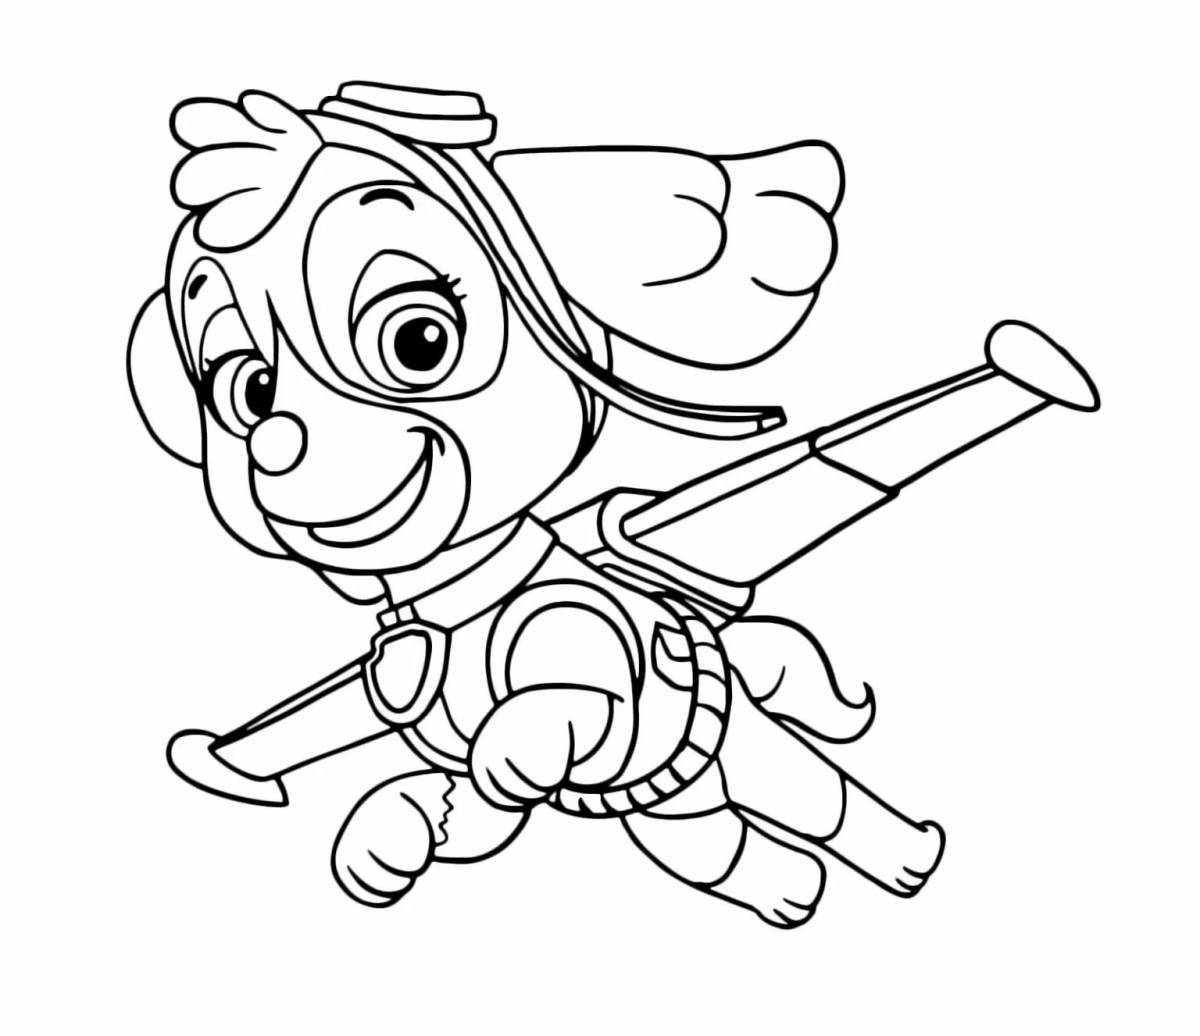 Bright sky coloring pages for kids